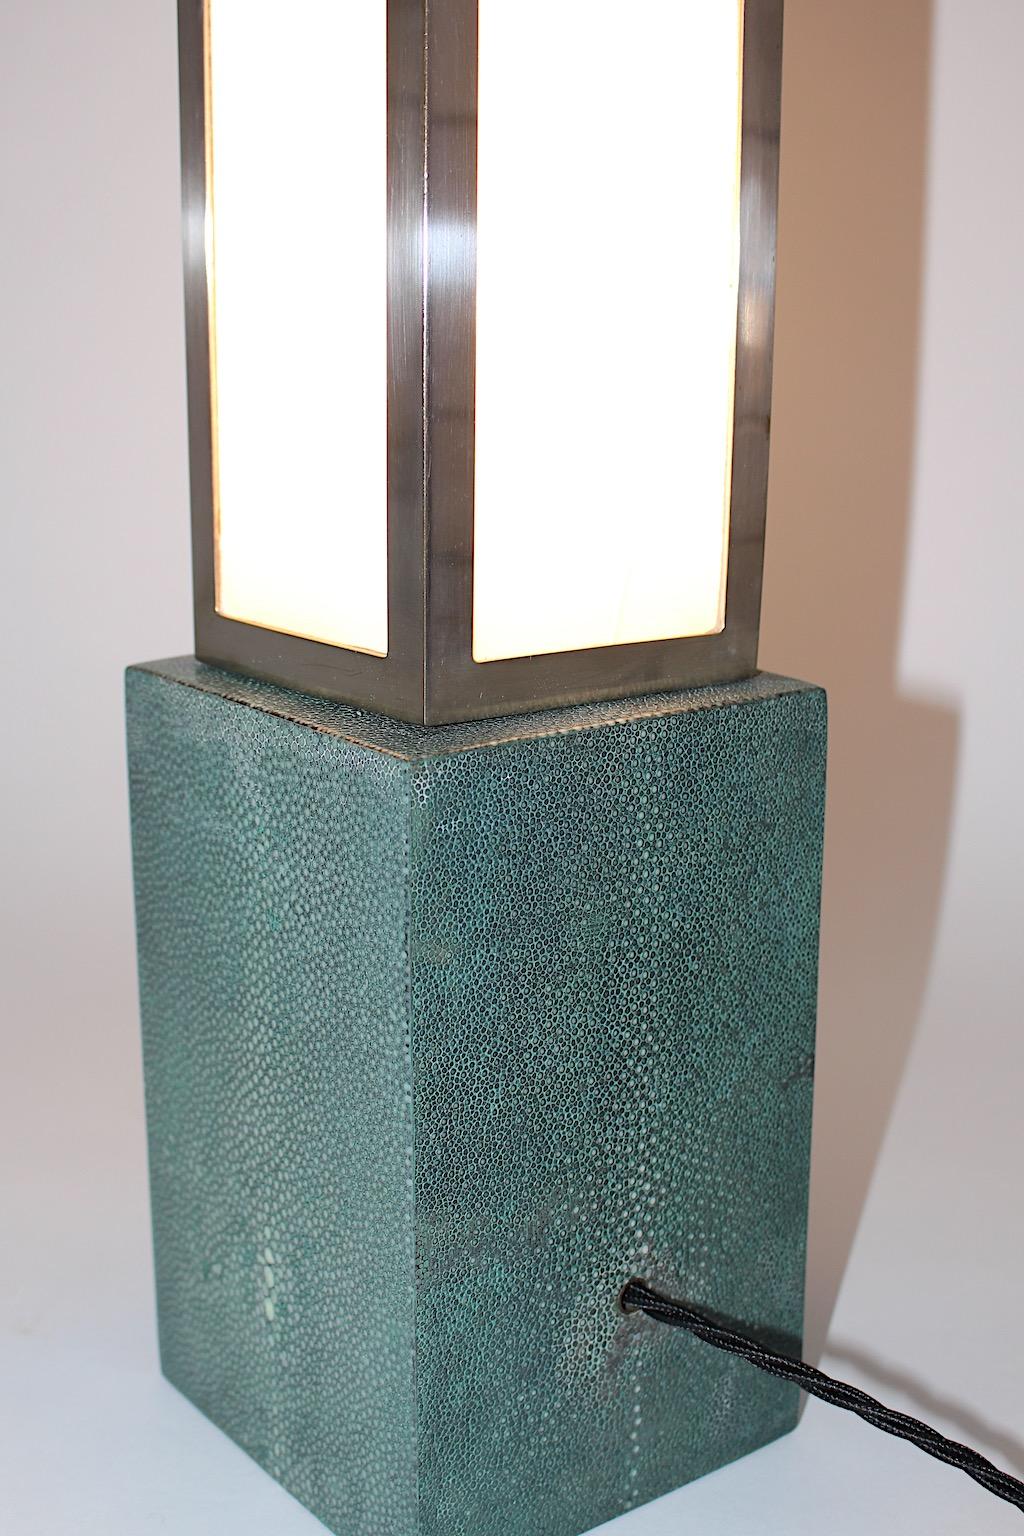 Art Deco Vintage Geometric Table Lamp Style Eckart Muthesius 1920s Germany For Sale 9